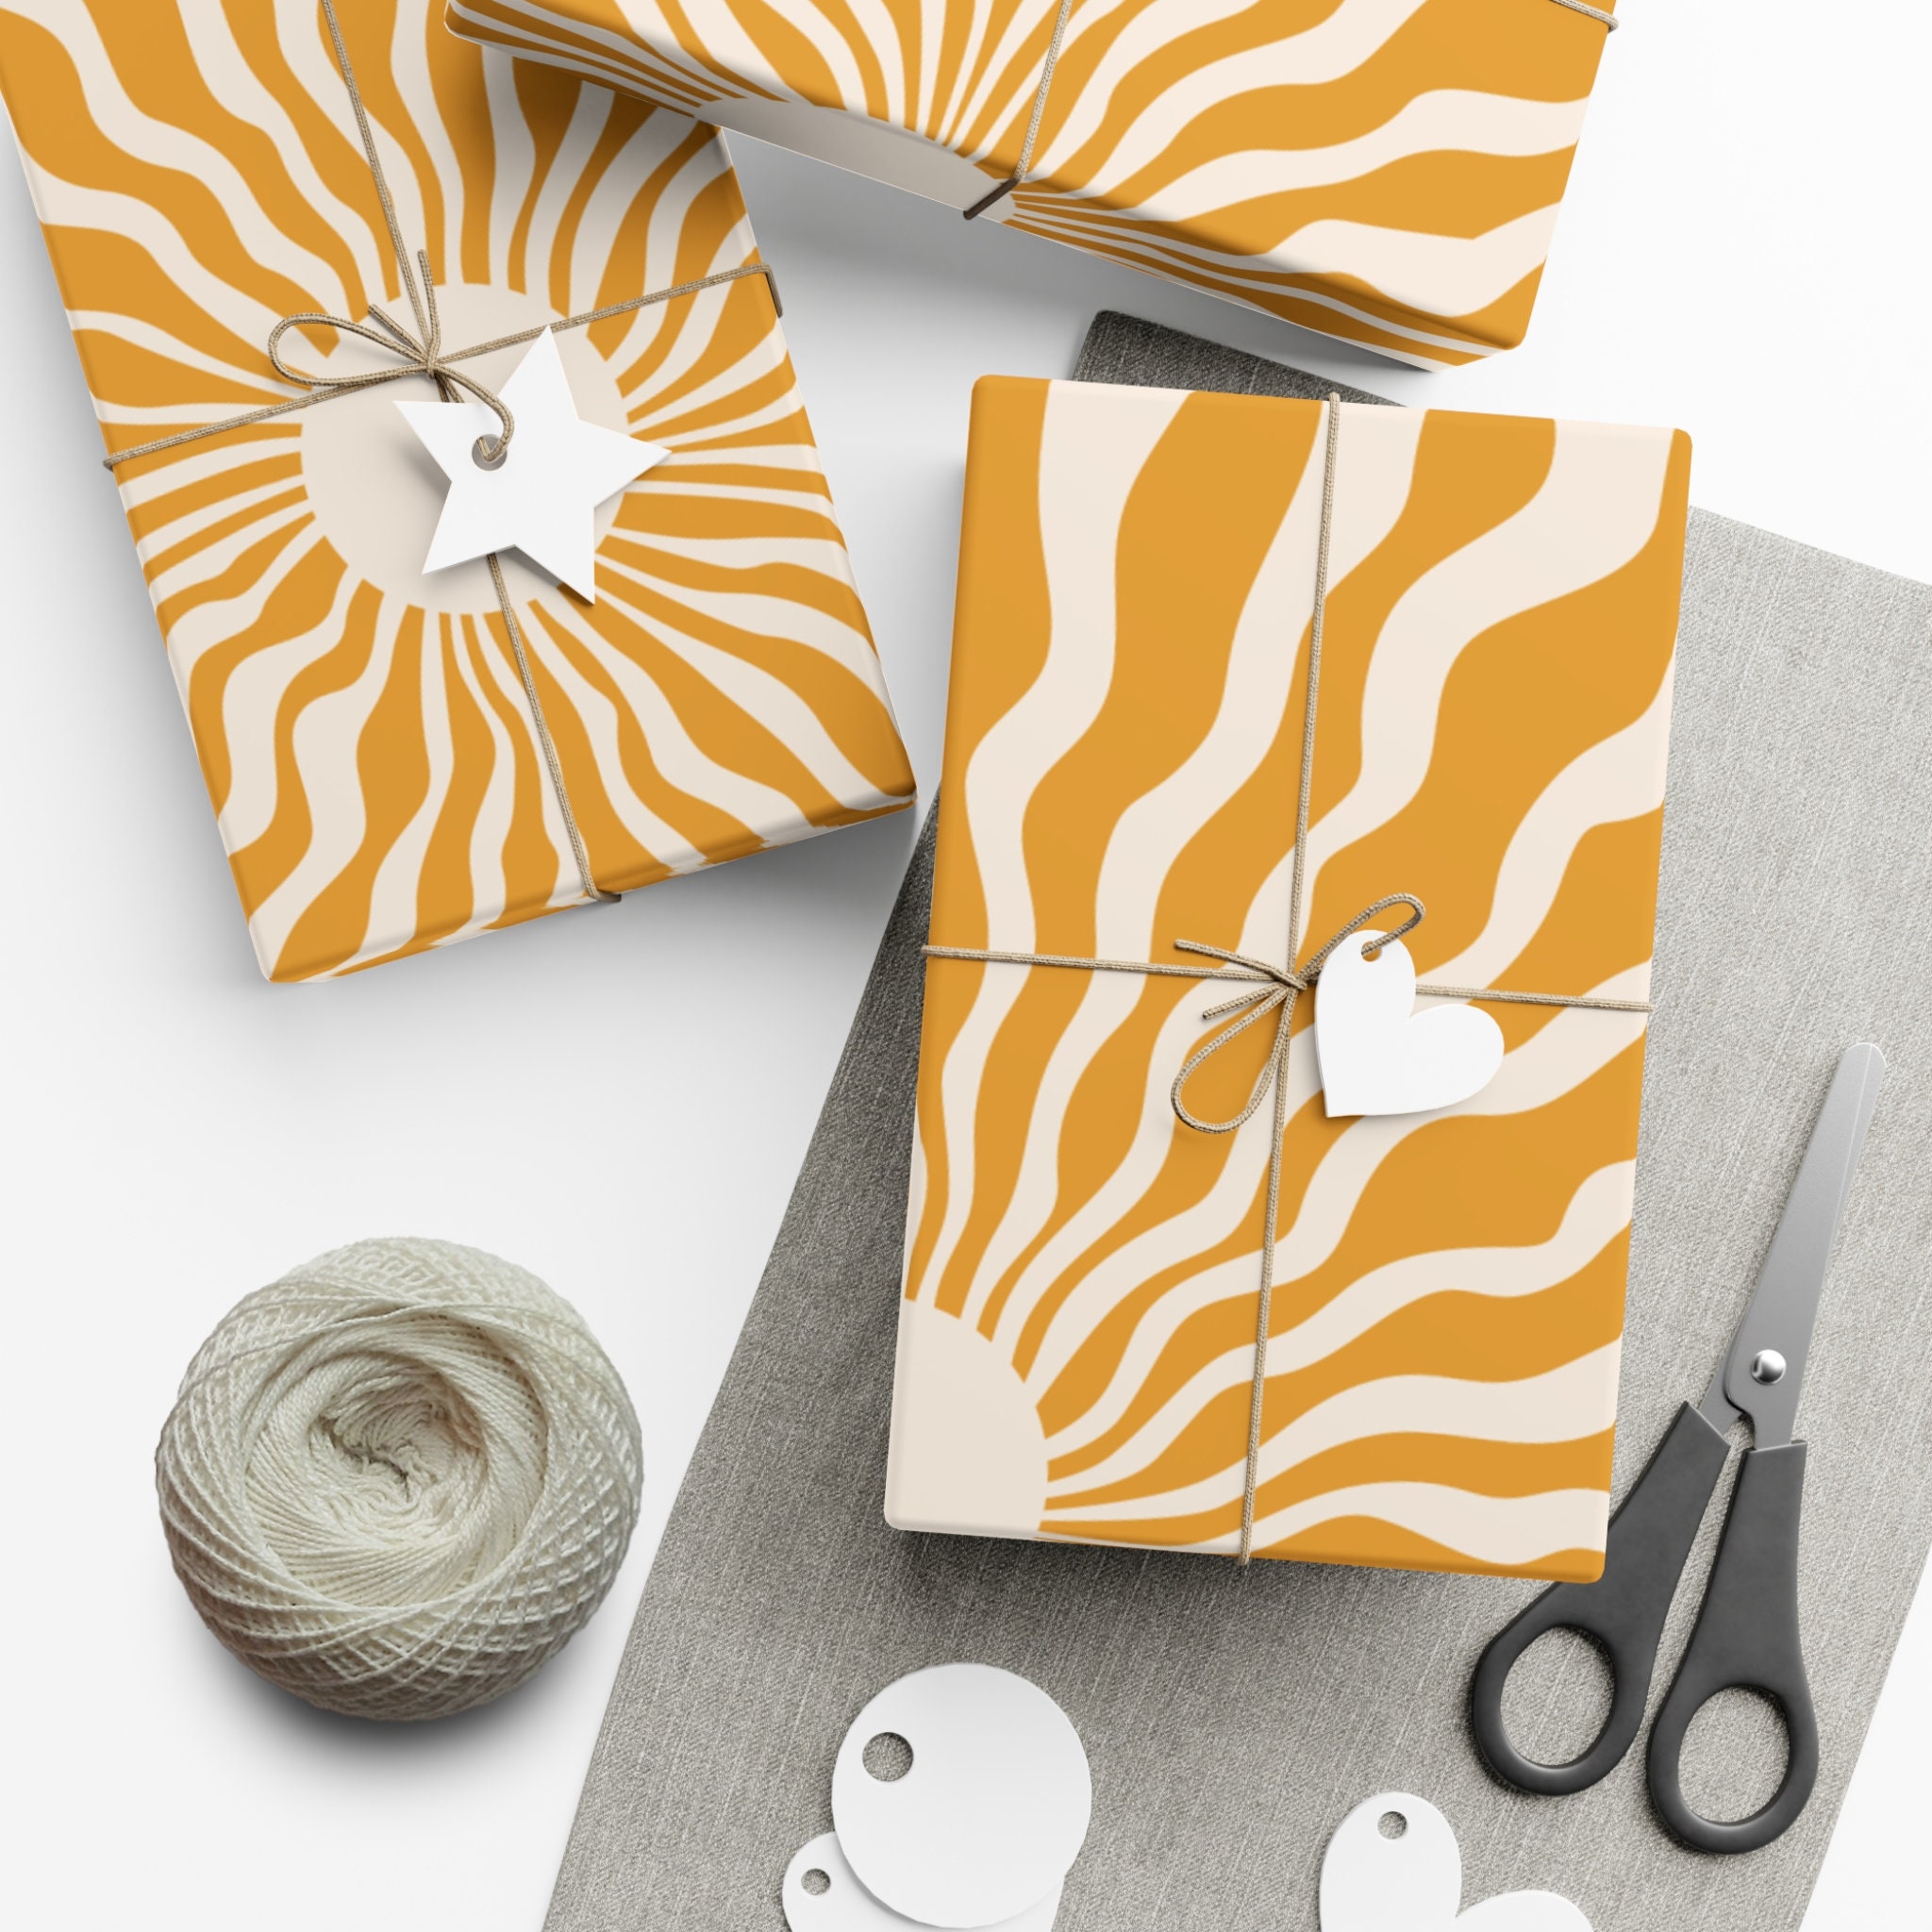 white gift wrapping paper - Sunlight Industry Limited